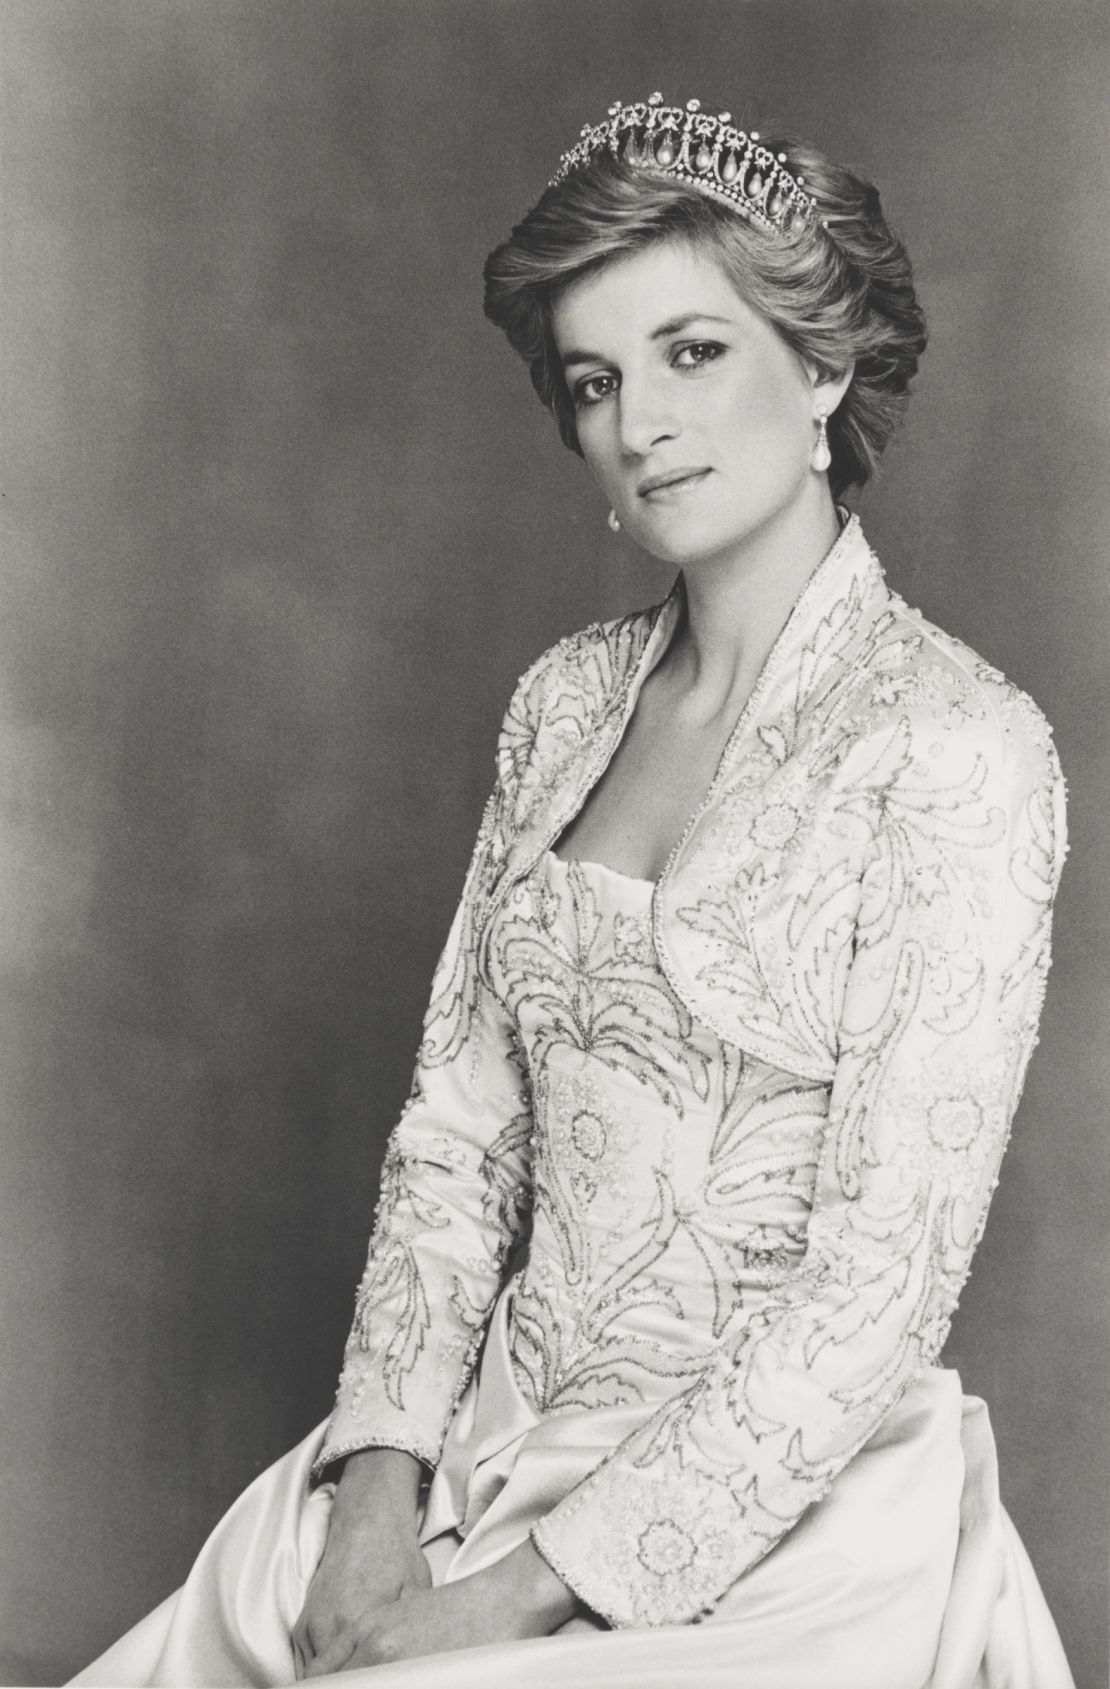 Terence Donovan, Diana, Princess of Wales, 1990, bromide print, the National Portrait Gallery, London, given by the photographer's widow, Diana Donovan, 1998, NPG P716 (11). Photograph Terence Donovan